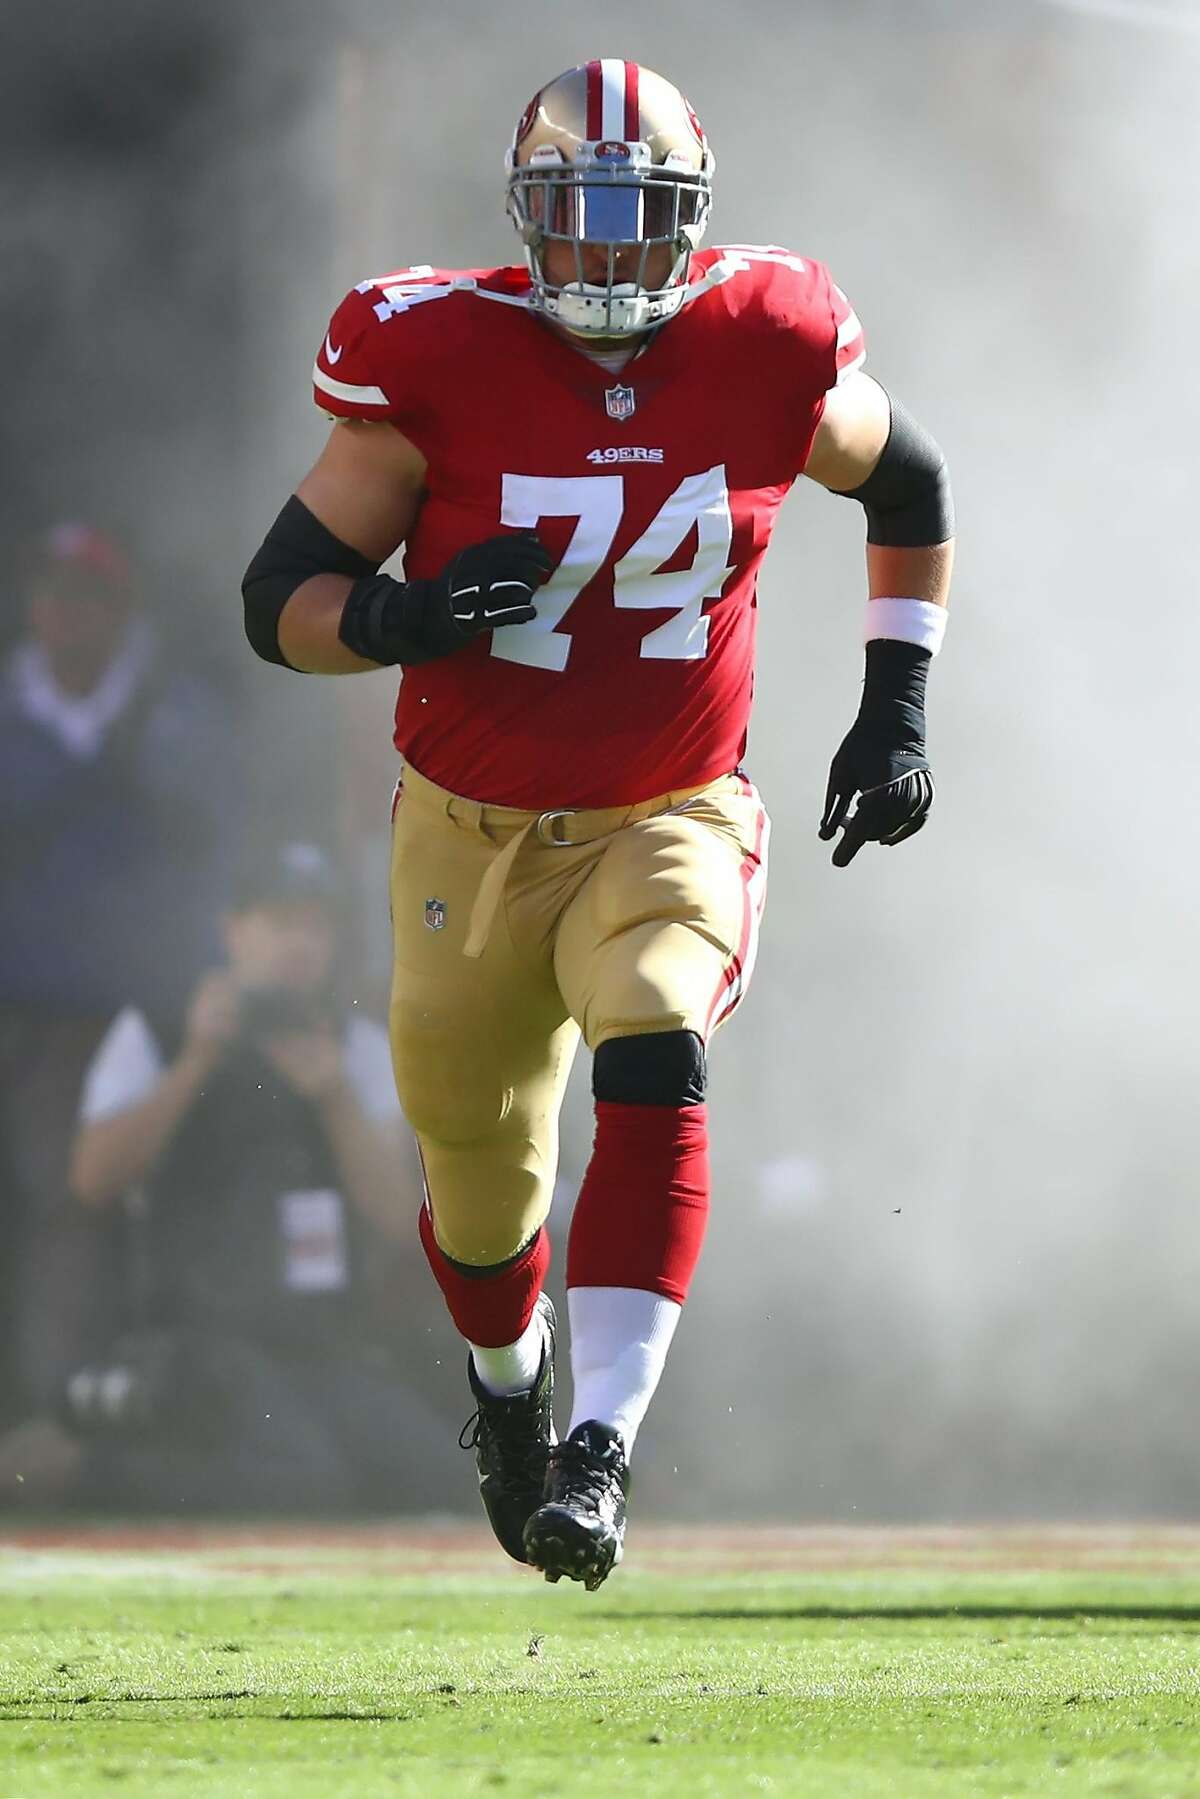 SANTA CLARA, CA - NOVEMBER 12: Joe Staley #74 of the San Francisco 49ers runs on to the field prior to playing the New York Giants in their NFL game at Levi's Stadium on November 12, 2017 in Santa Clara, California. (Photo by Ezra Shaw/Getty Images)